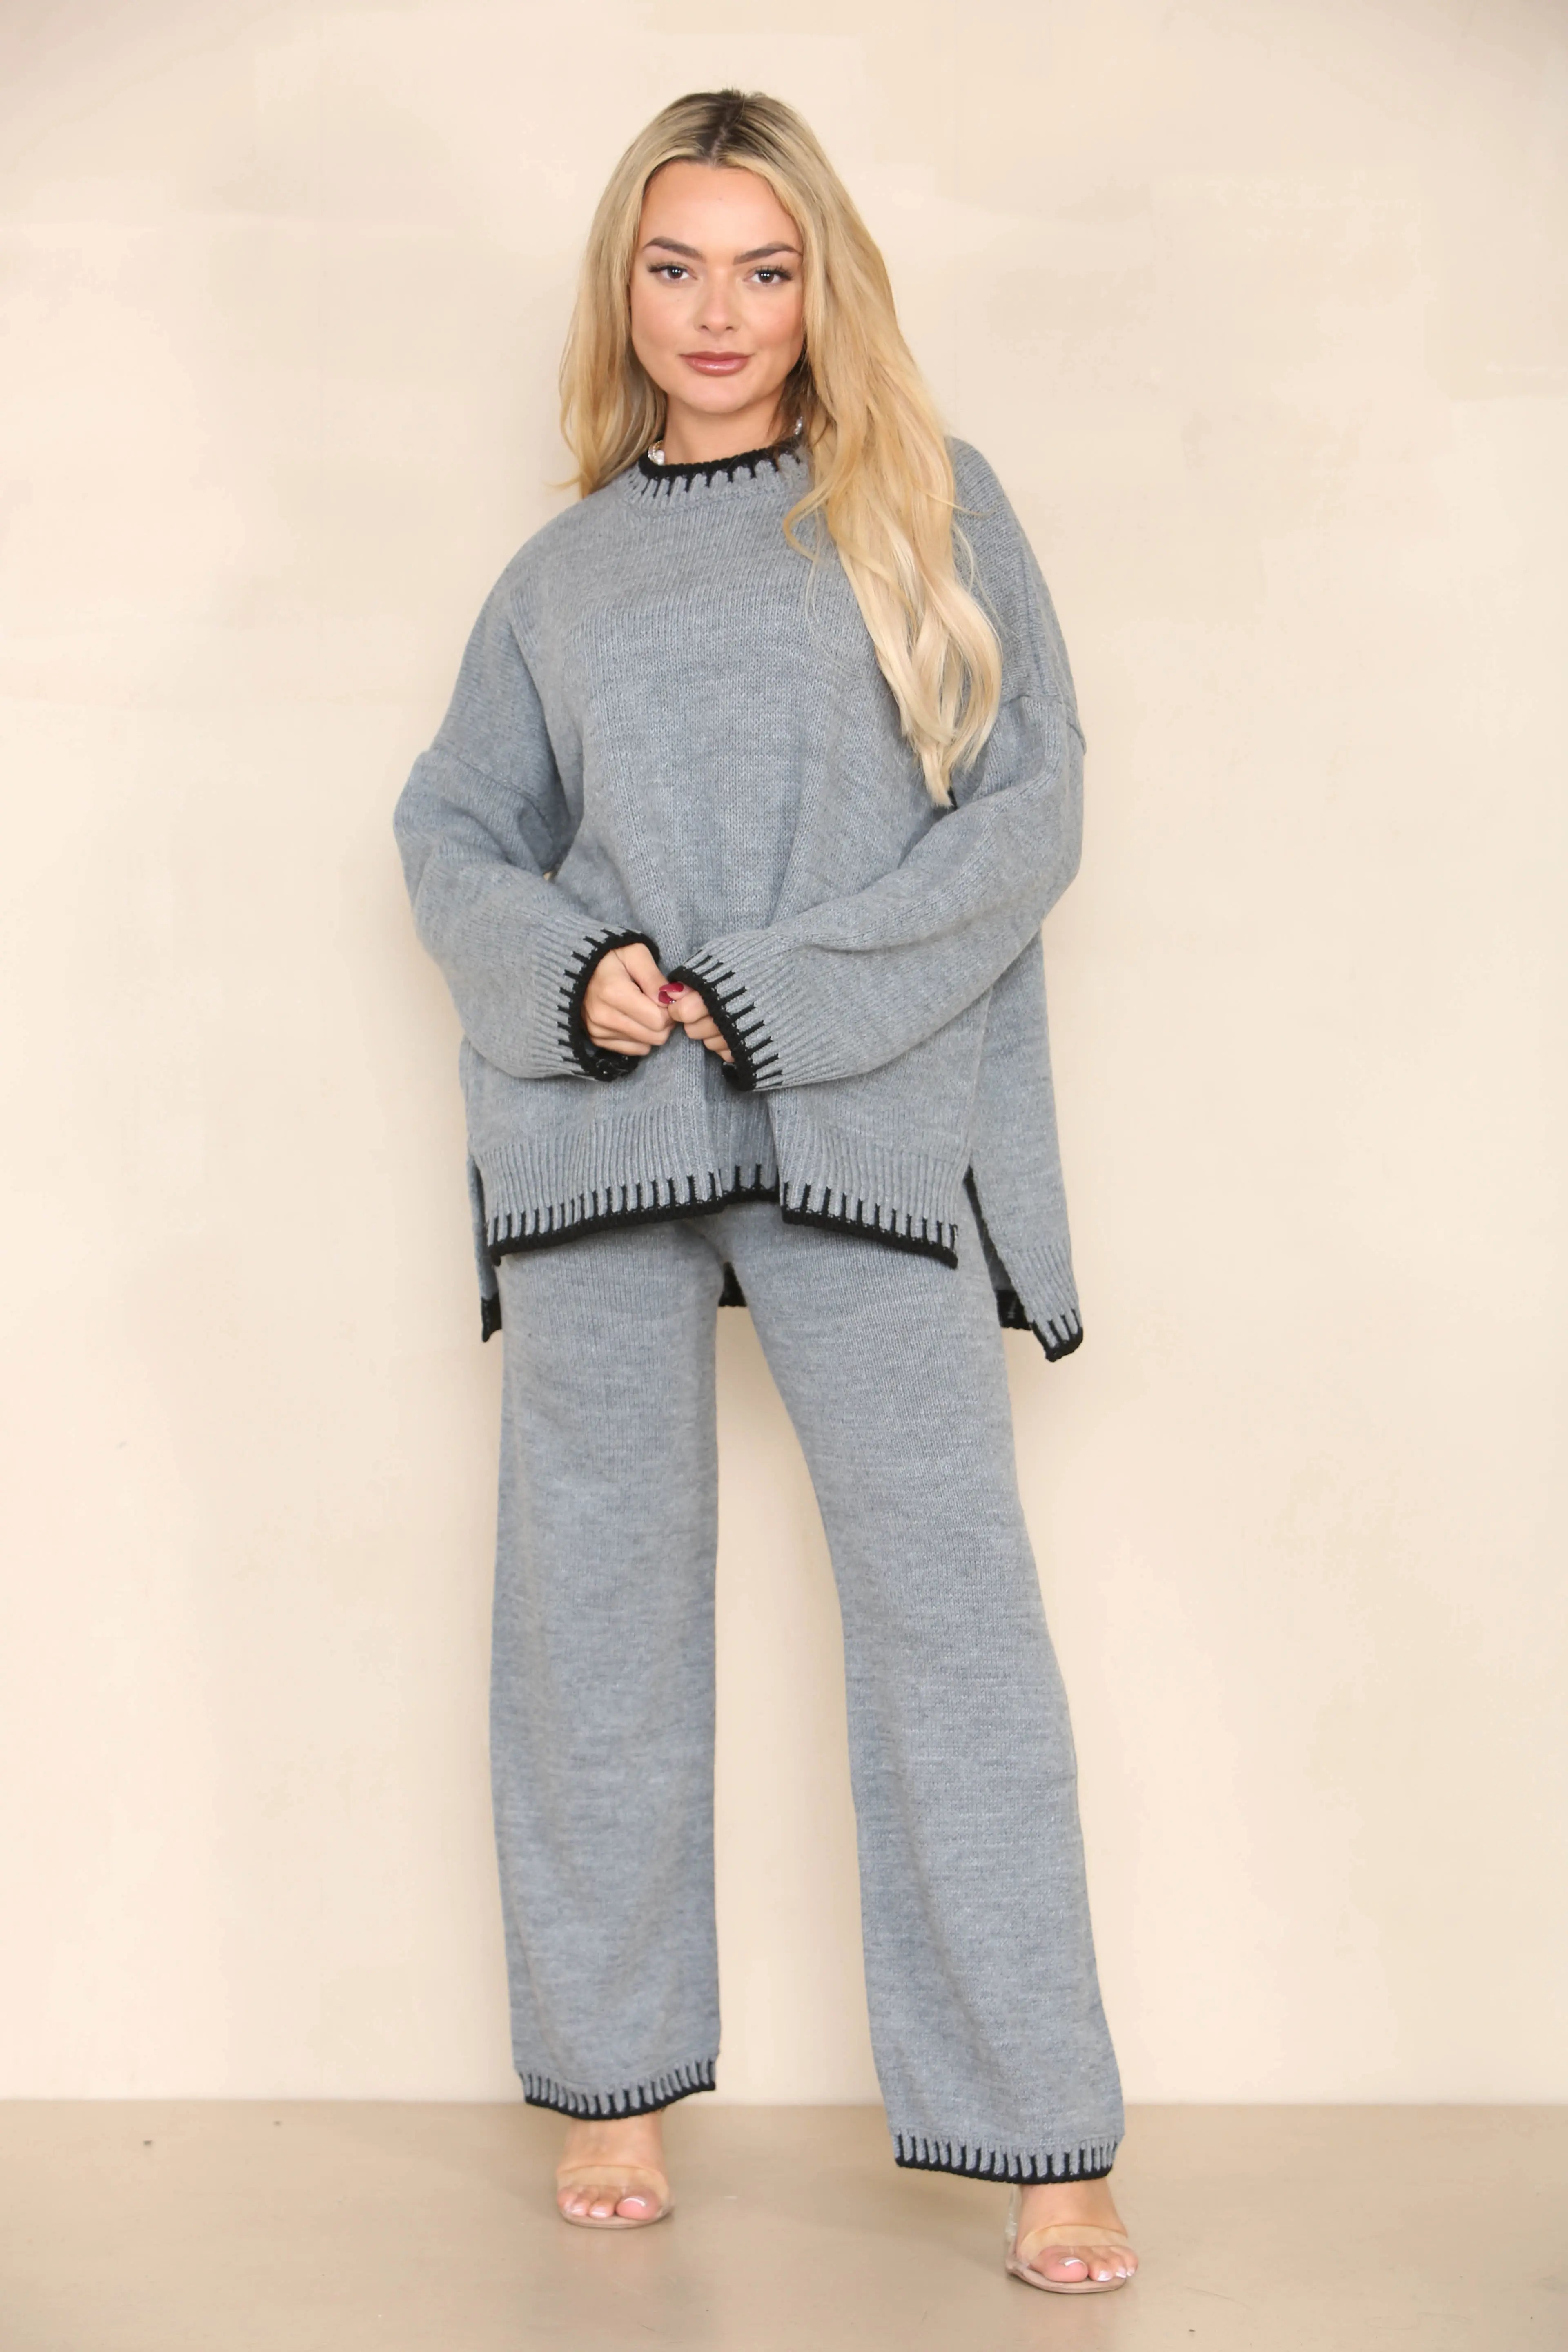 KATCH ME Charcoal Chic Loungewear Wavy Edge Round Neck Long Sleeve Top & Wide Leg Pants Co-ord Co-ord 32.99